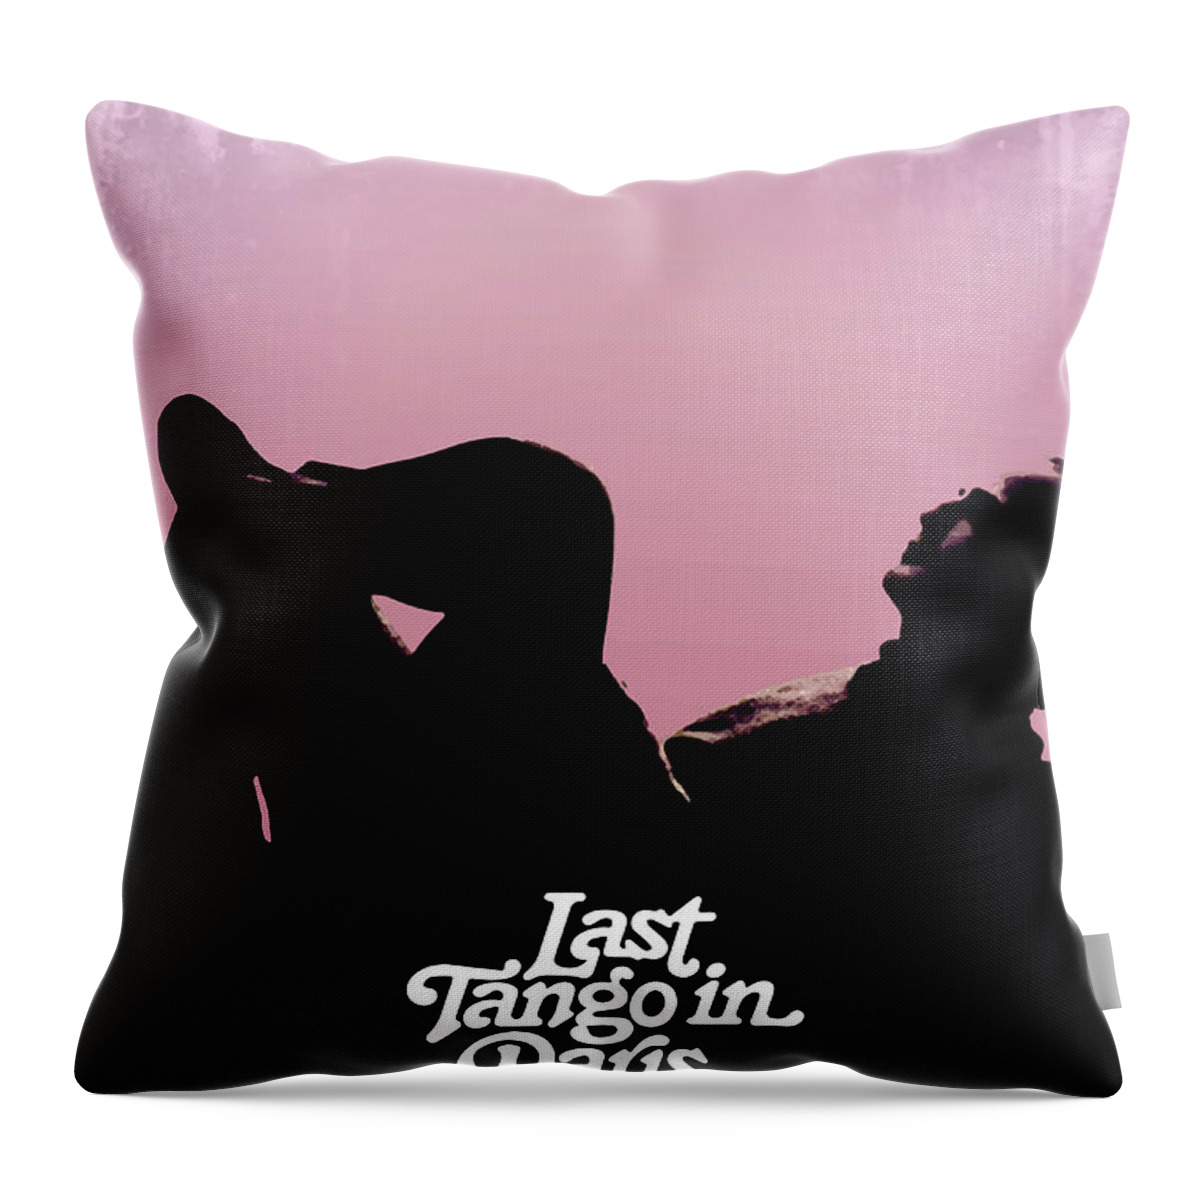 Movie Poster Throw Pillow featuring the digital art Last Tango In Paris by Bo Kev